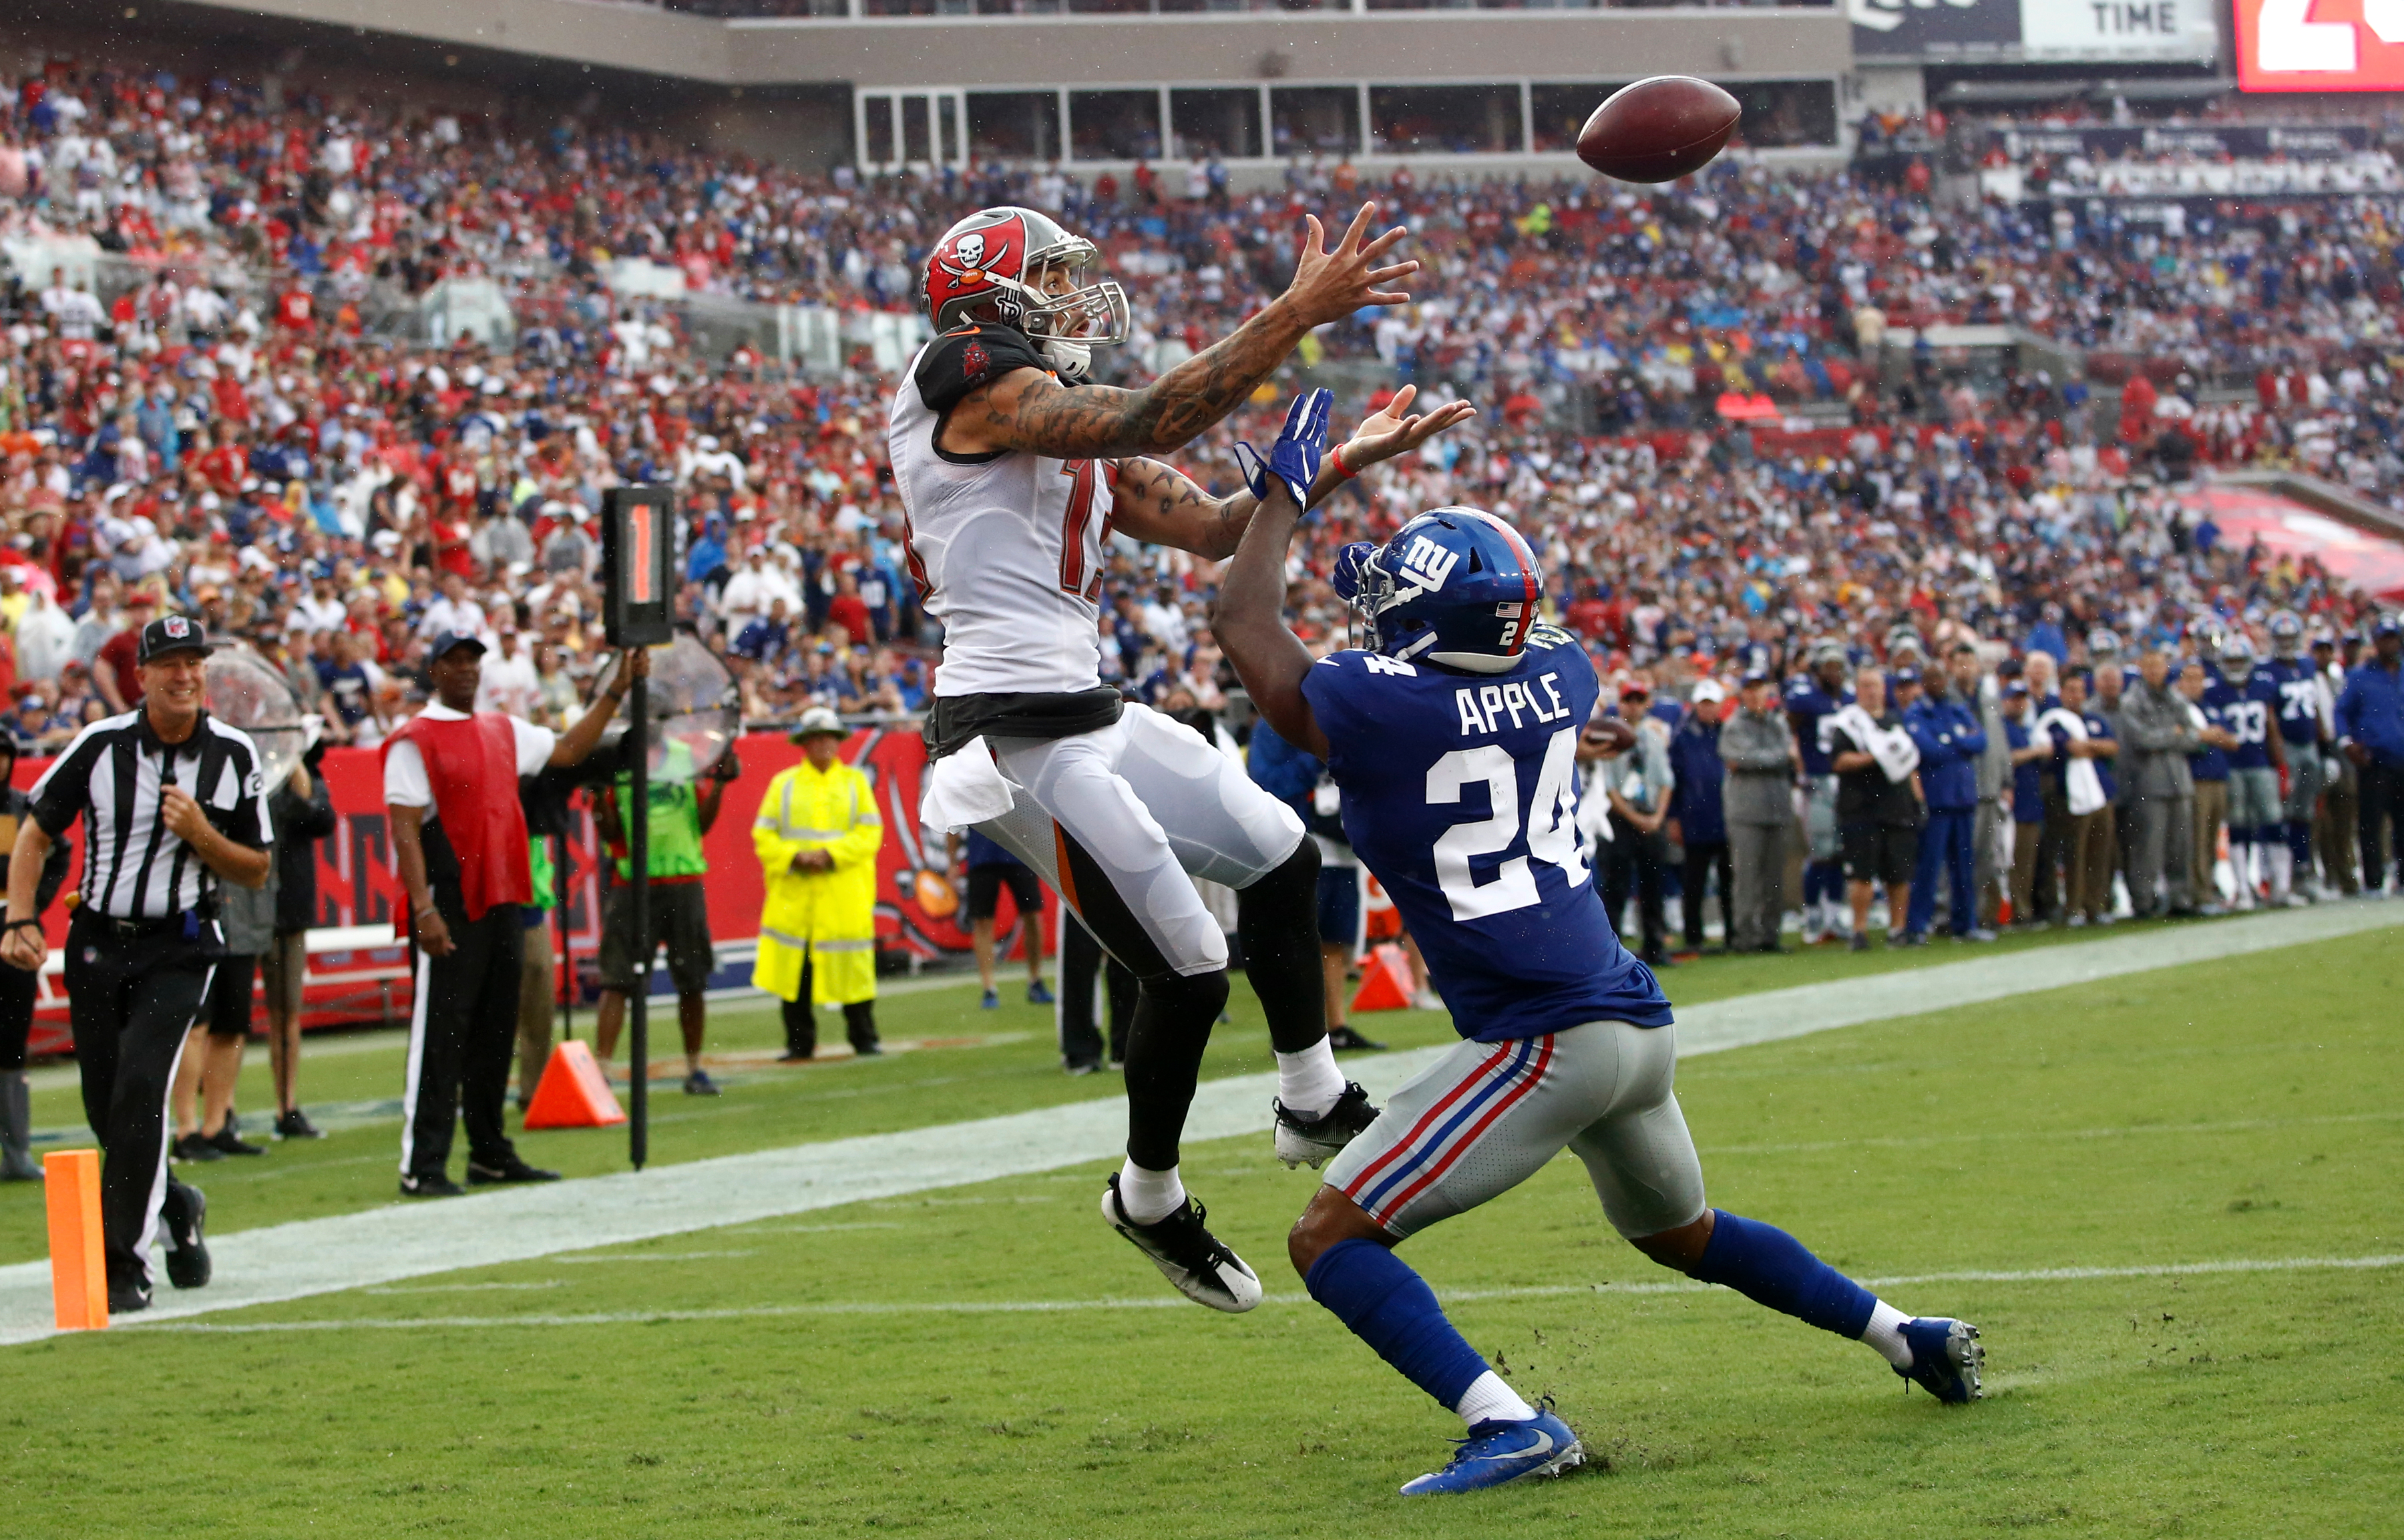 Giants vs. Buccaneers: Highlights, game tracker and more